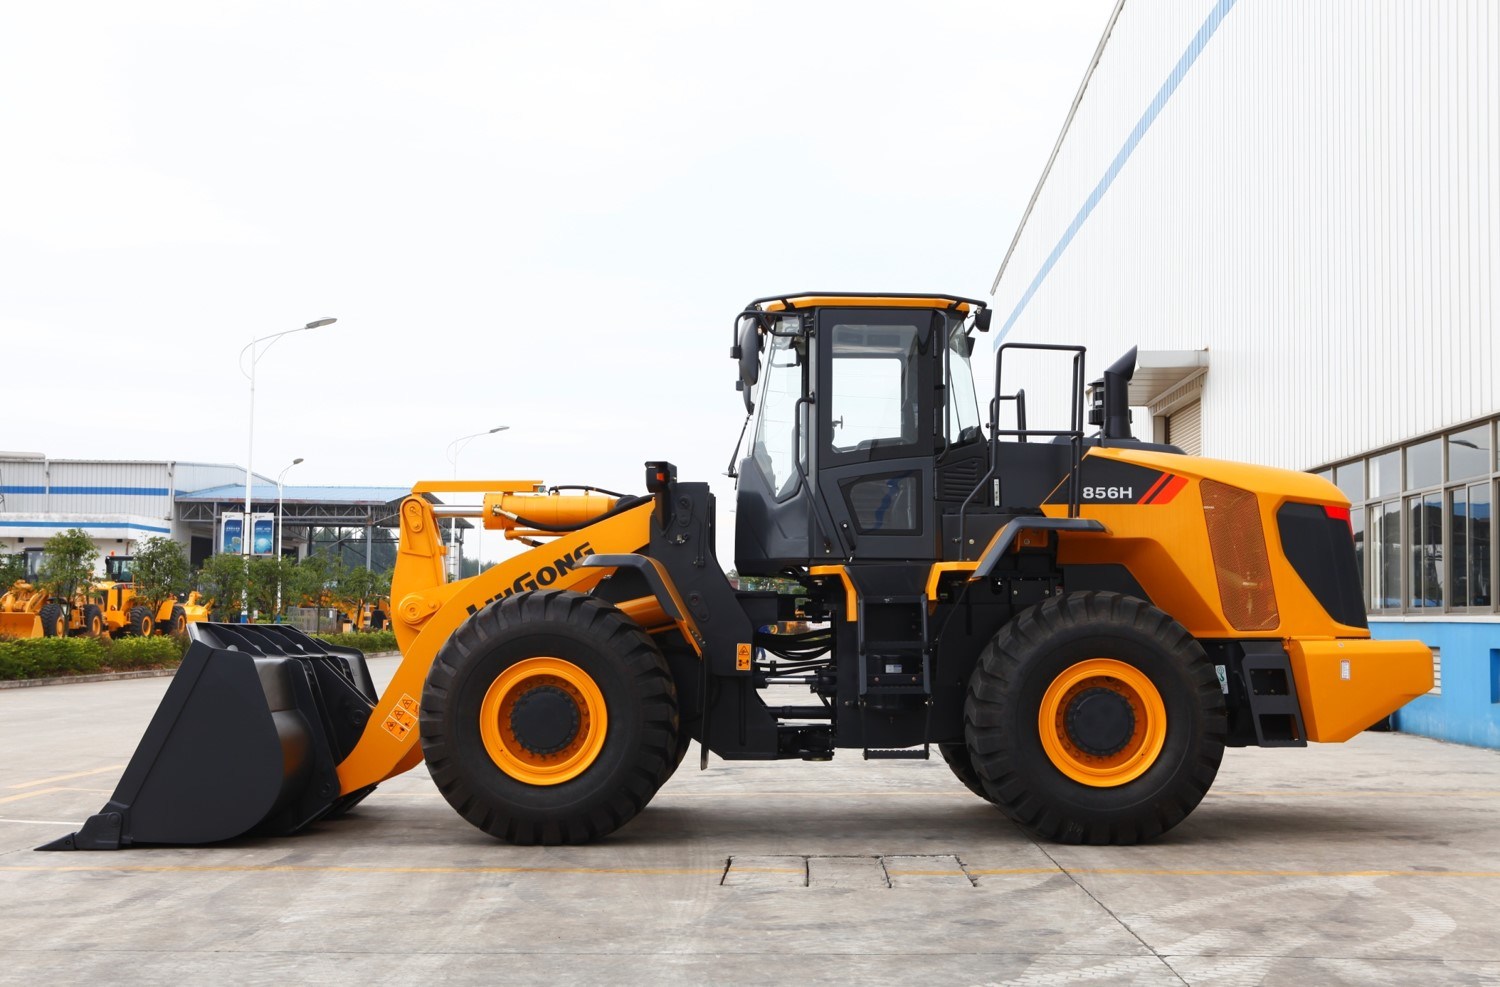 China High Quality Liugong Clg856h 5t Wheel Loader with Cummins Engine